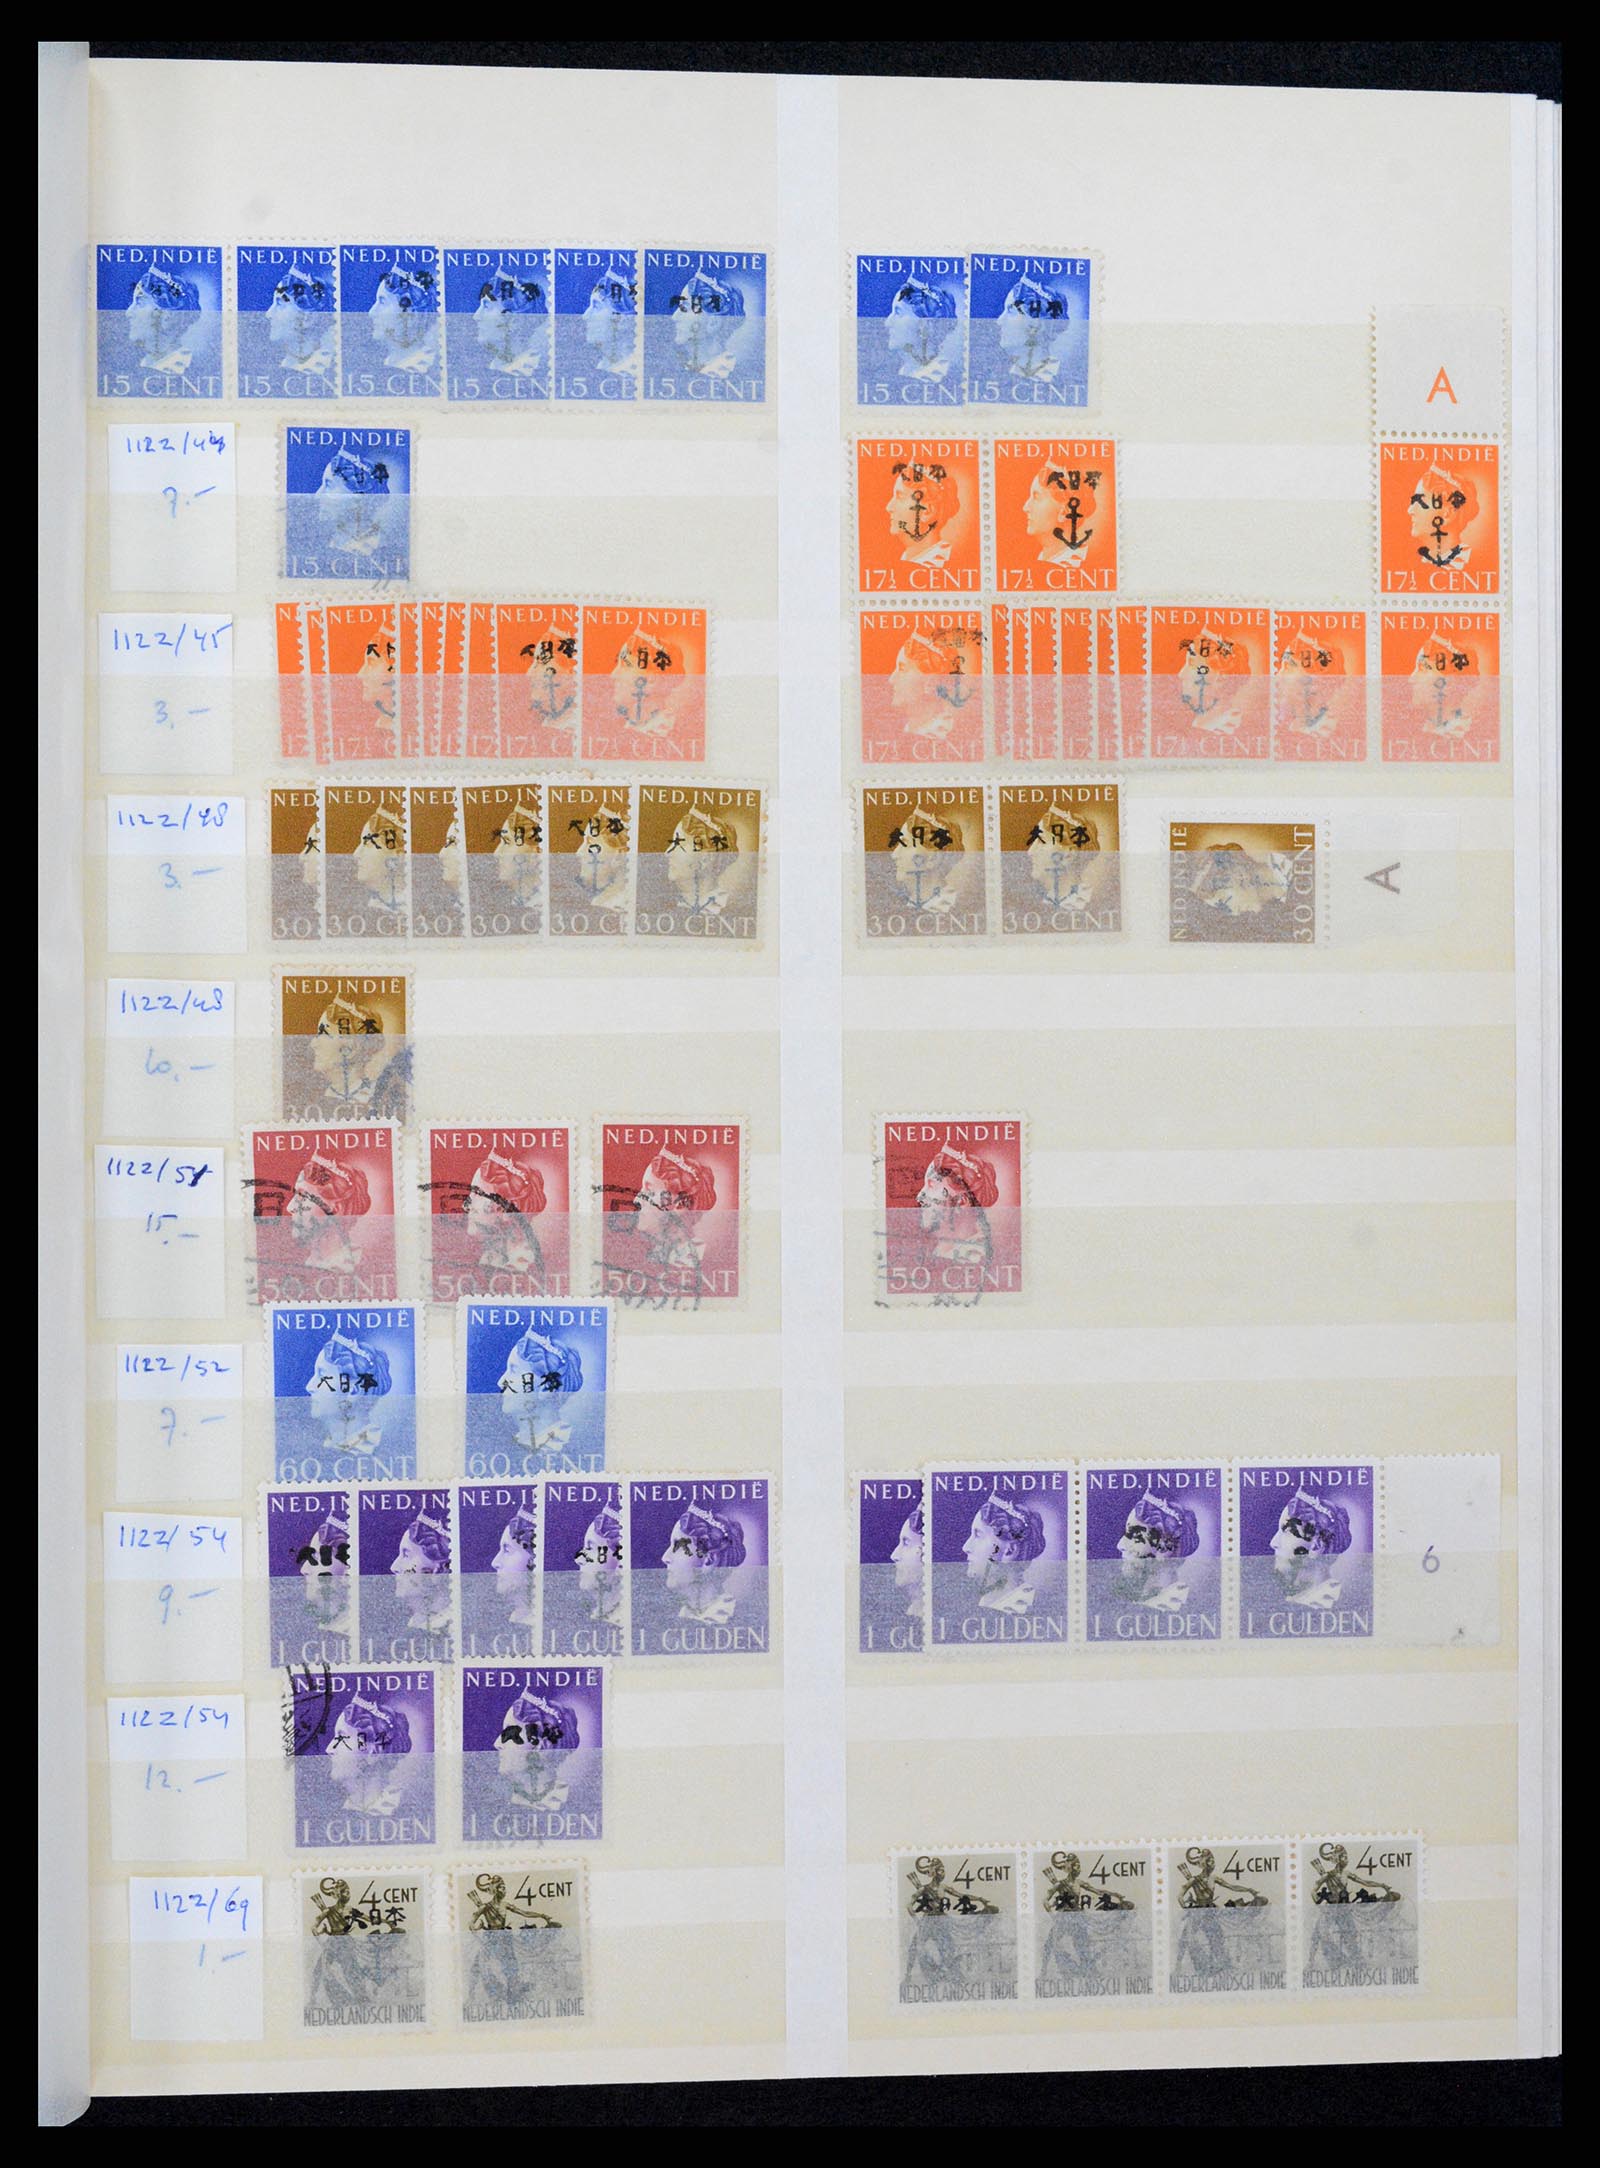 37429 019 - Stamp collection 37429 Japanese occupation Dutch East Indies 1942-1945.